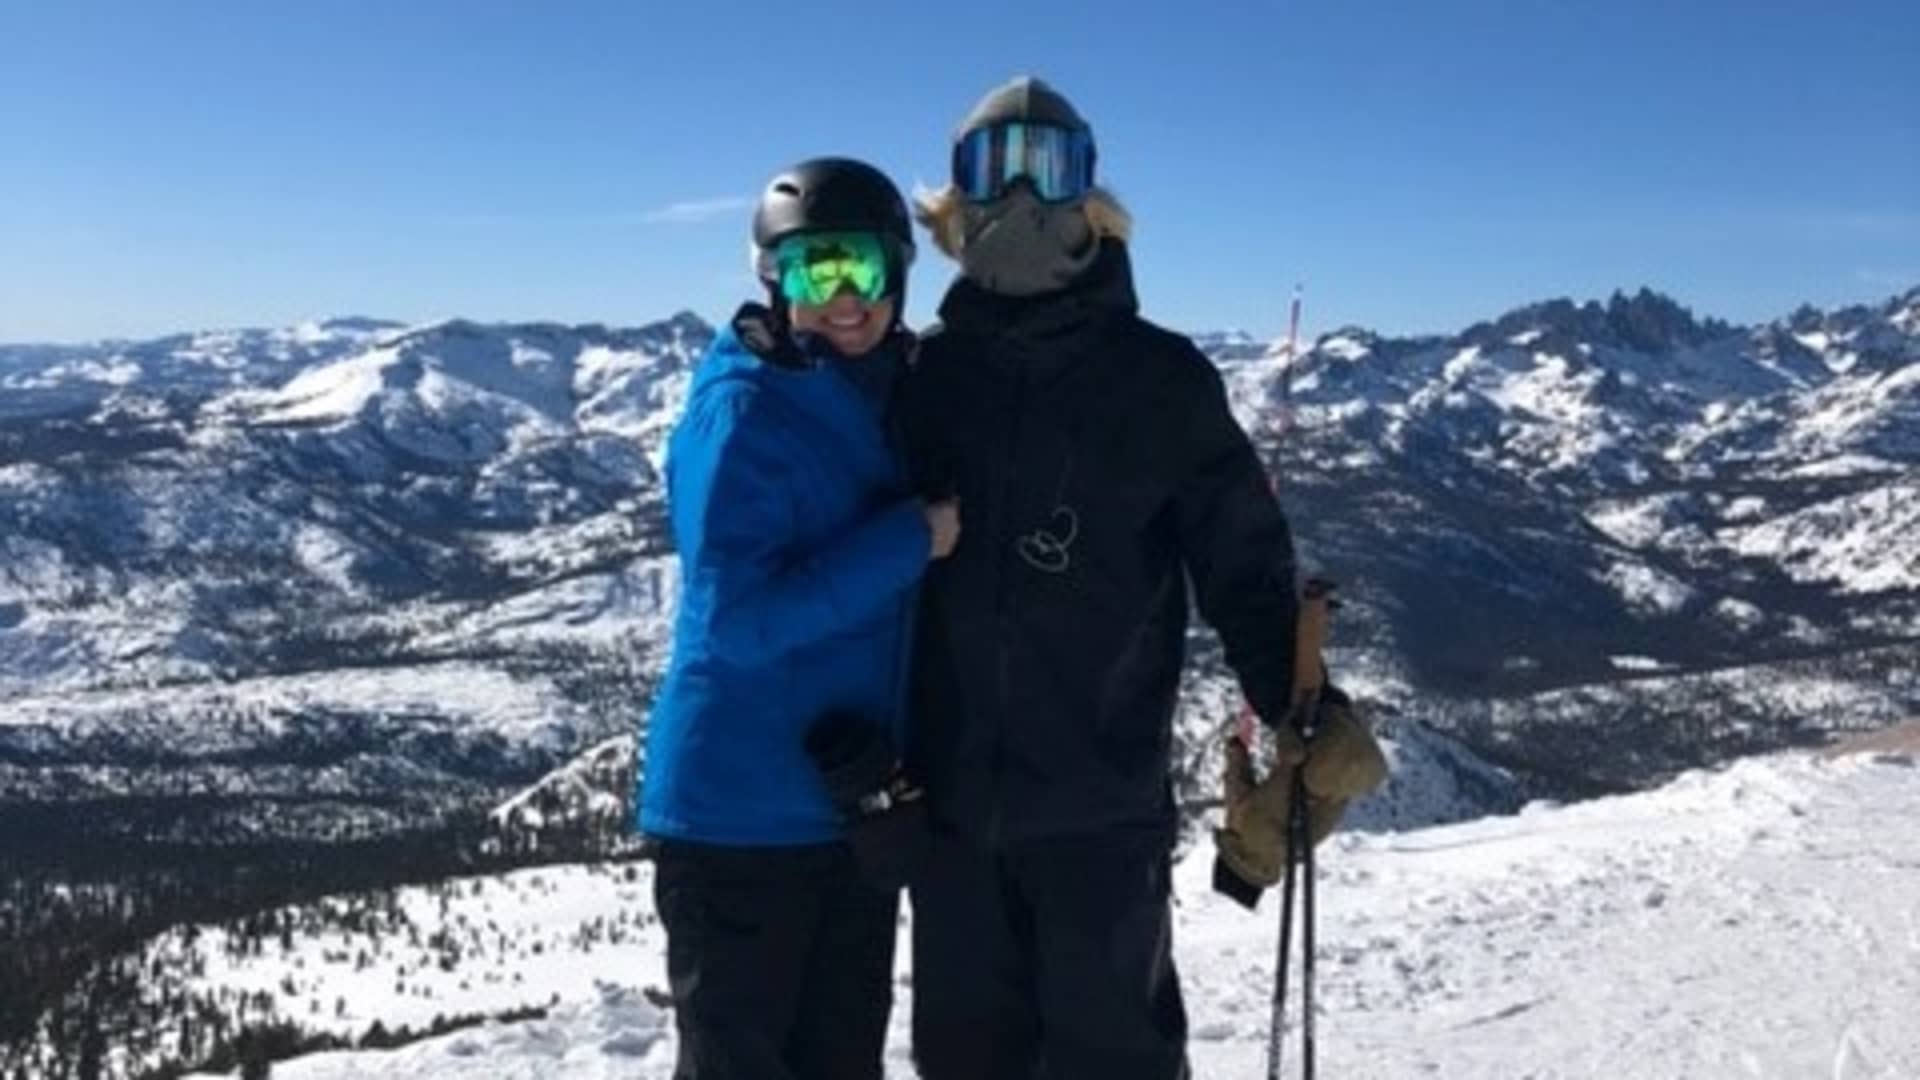 JoAnn Shilling's fully remote job allows her to work while traveling, like on this recent trip to Mammoth Mountain, California, with her son.